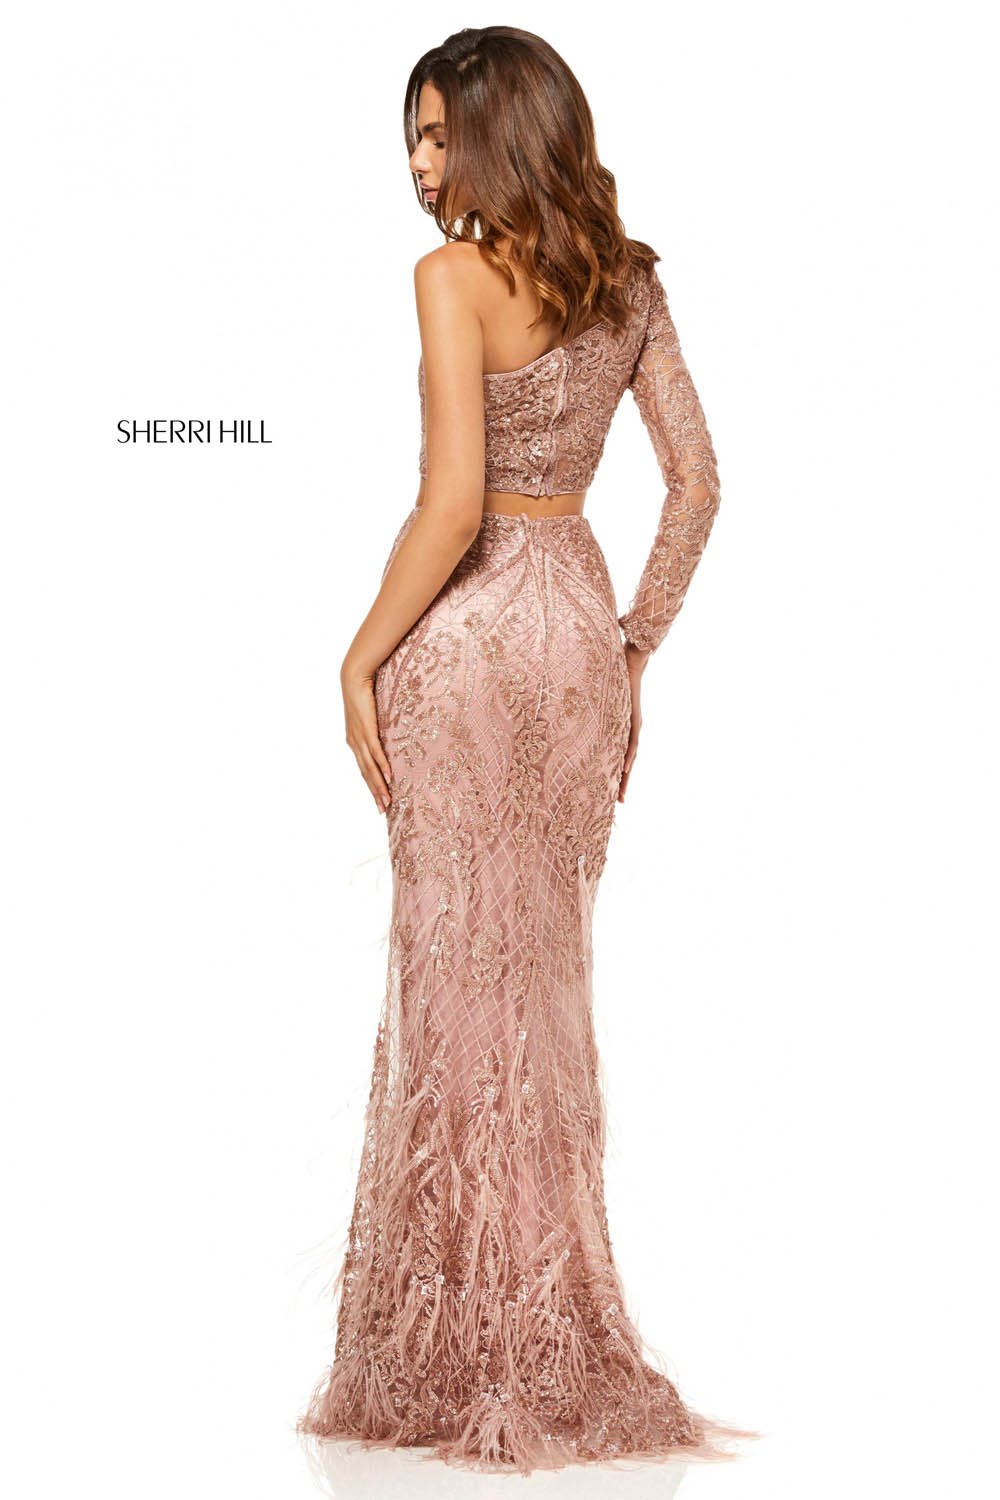 Sherri Hill 52555 dress images in these colors: Rose Gold, Black, Wine, Navy, Silver.